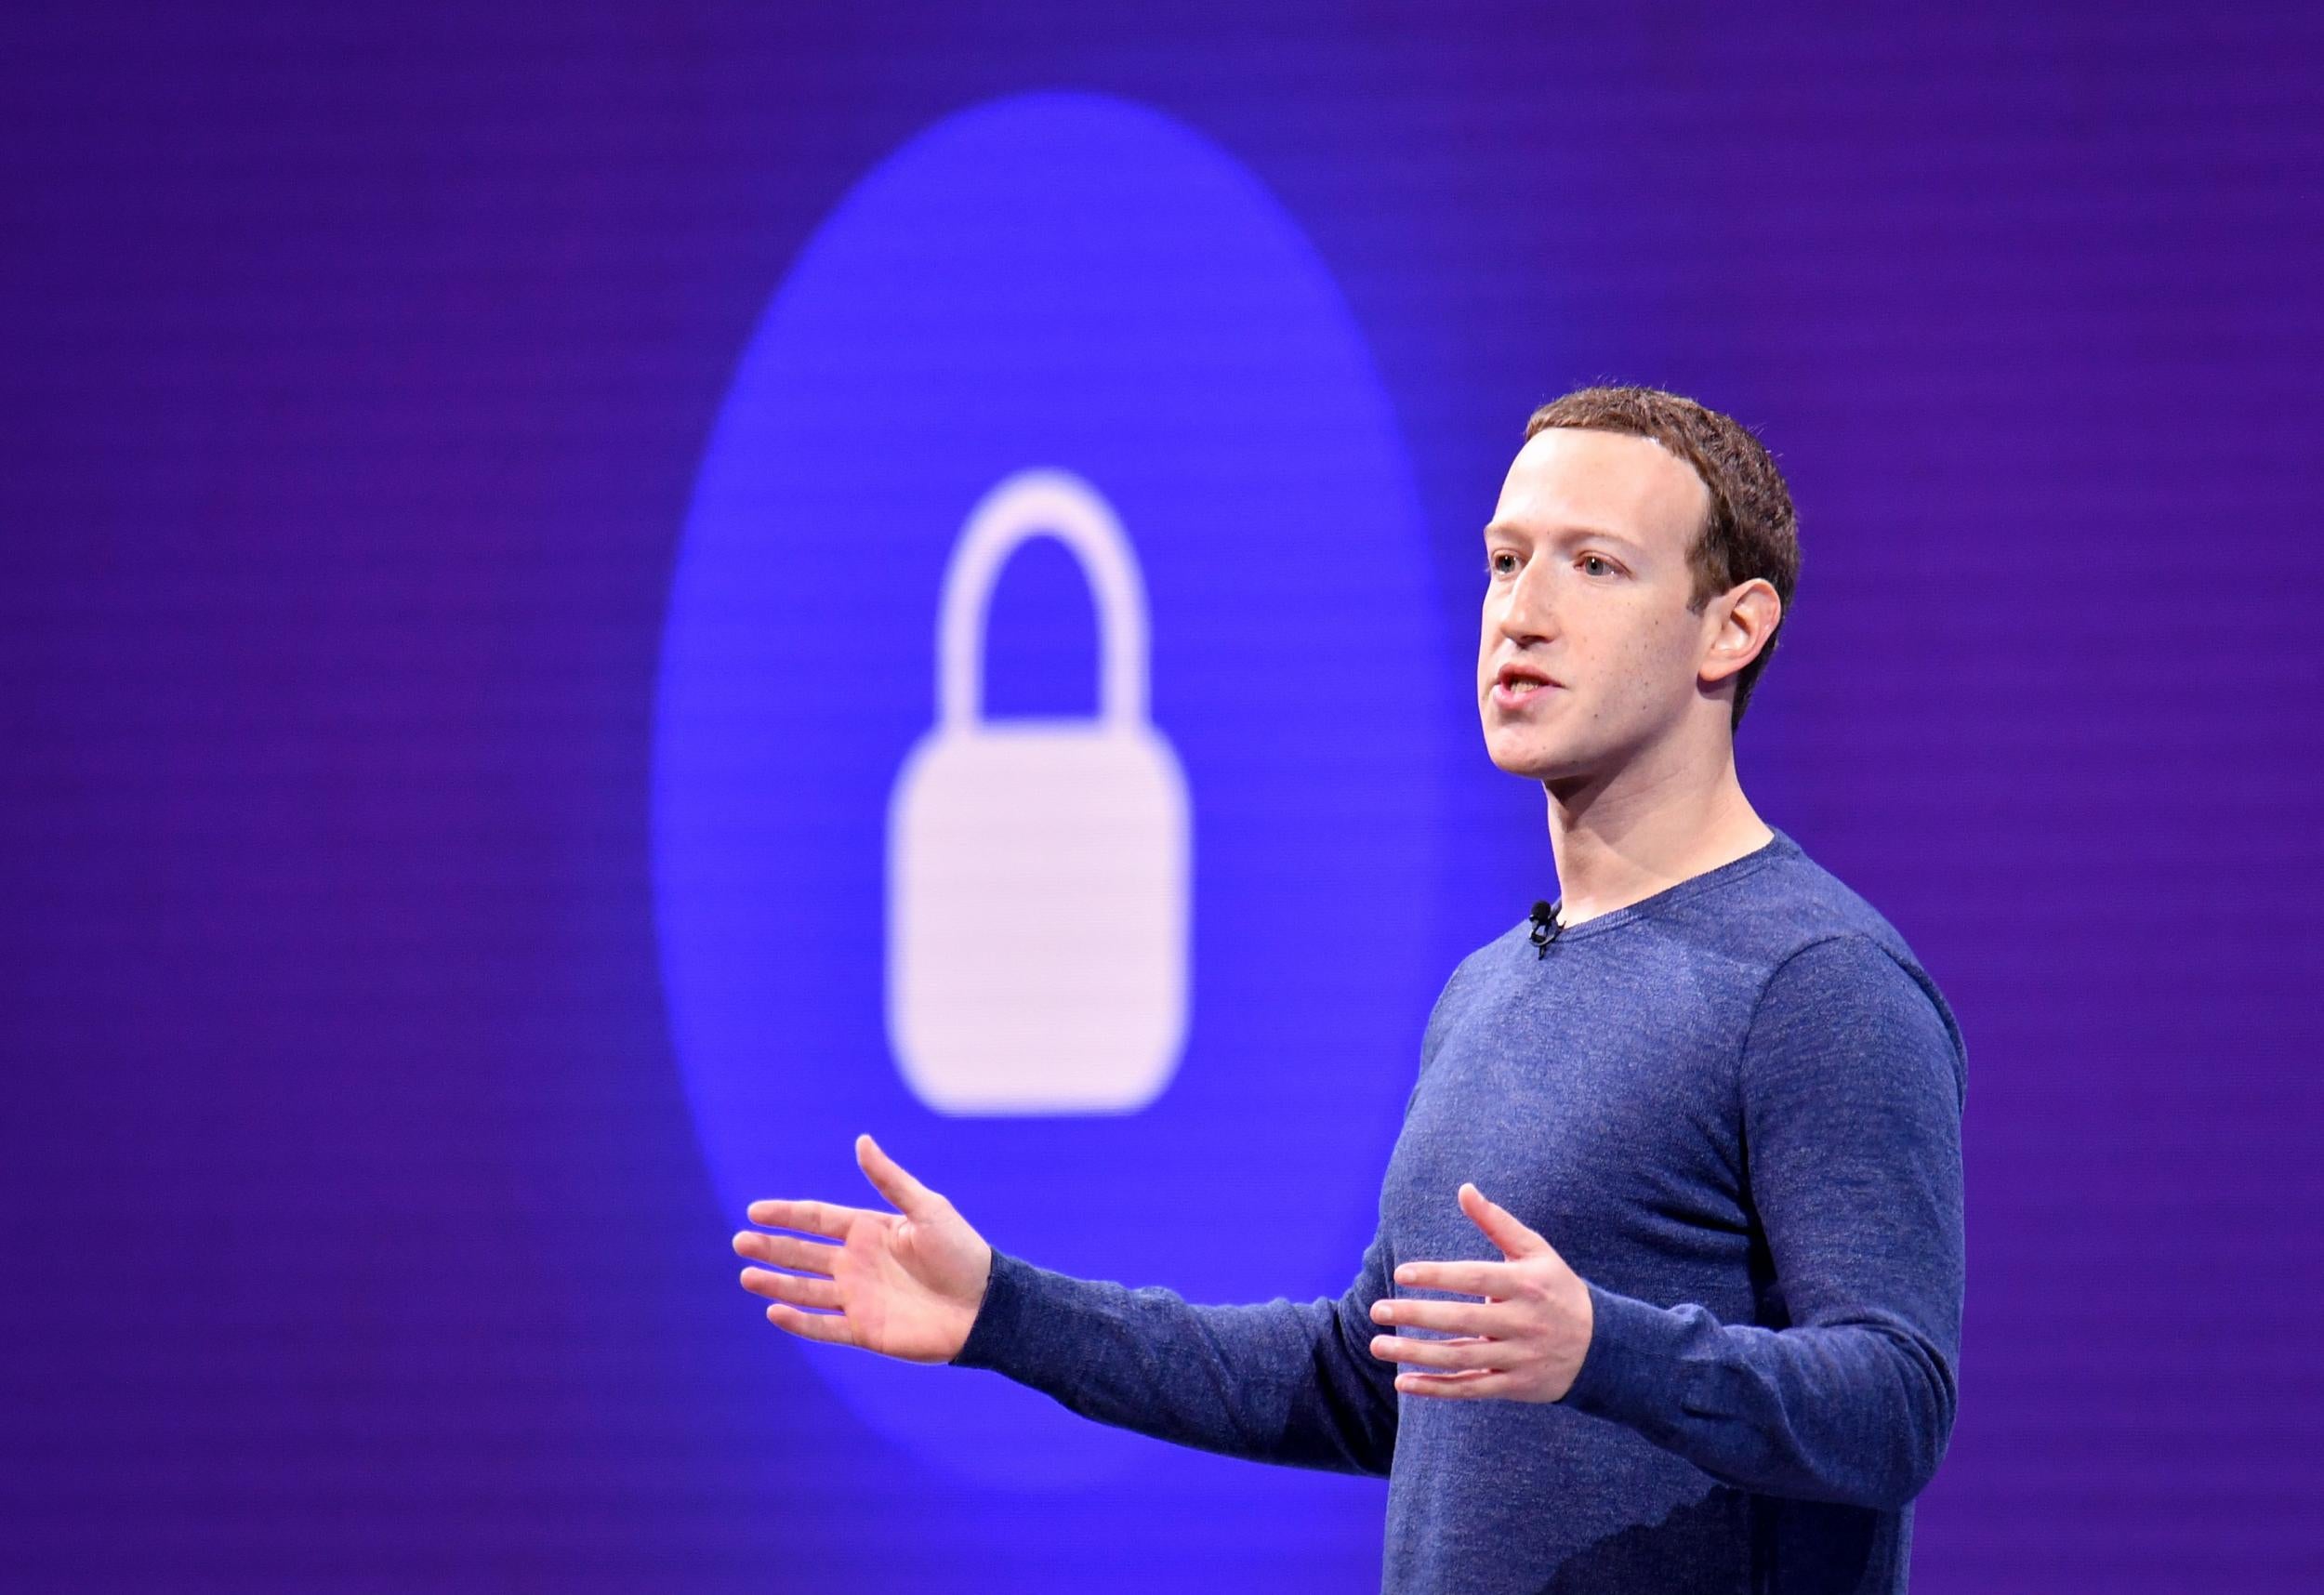 Facebook CEO Mark Zuckerberg vowed to make privacy protection its top priority when he spoke during the annual F8 summit in San Jose earlier this year